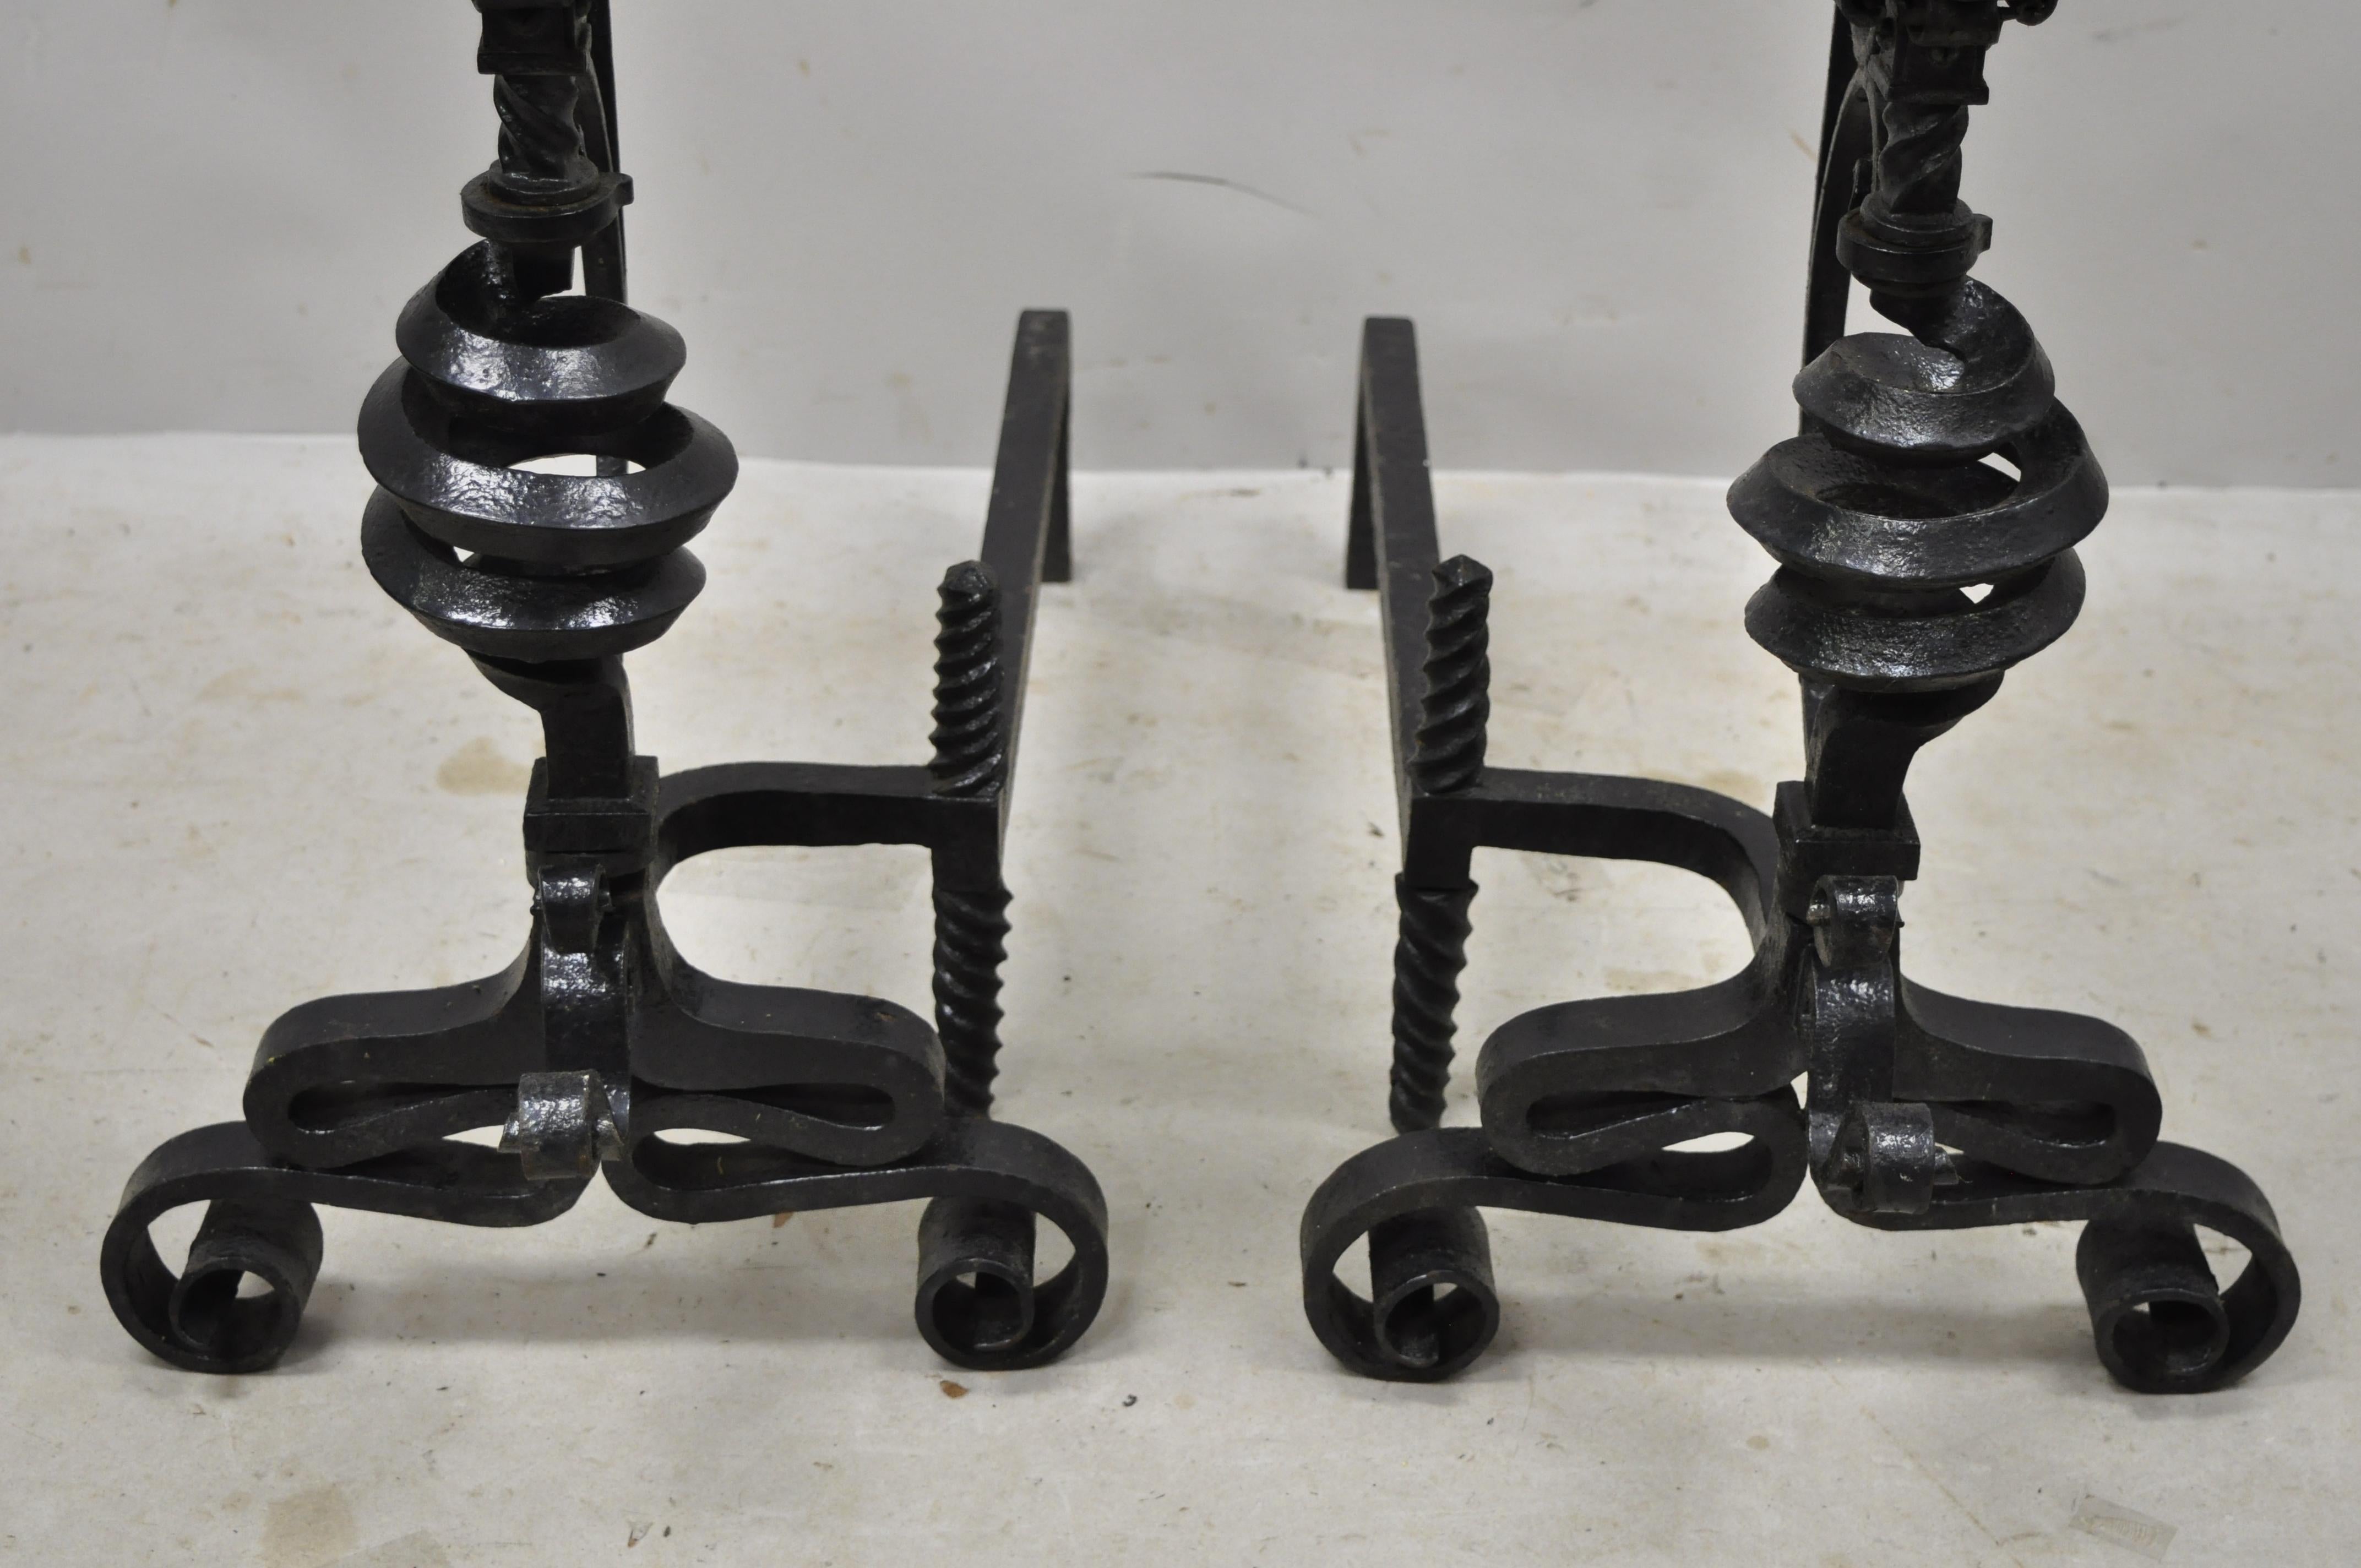 European Arts & Crafts Gothic Cast Iron Spiral Scrollwork Fireplace Andirons, a Pair For Sale